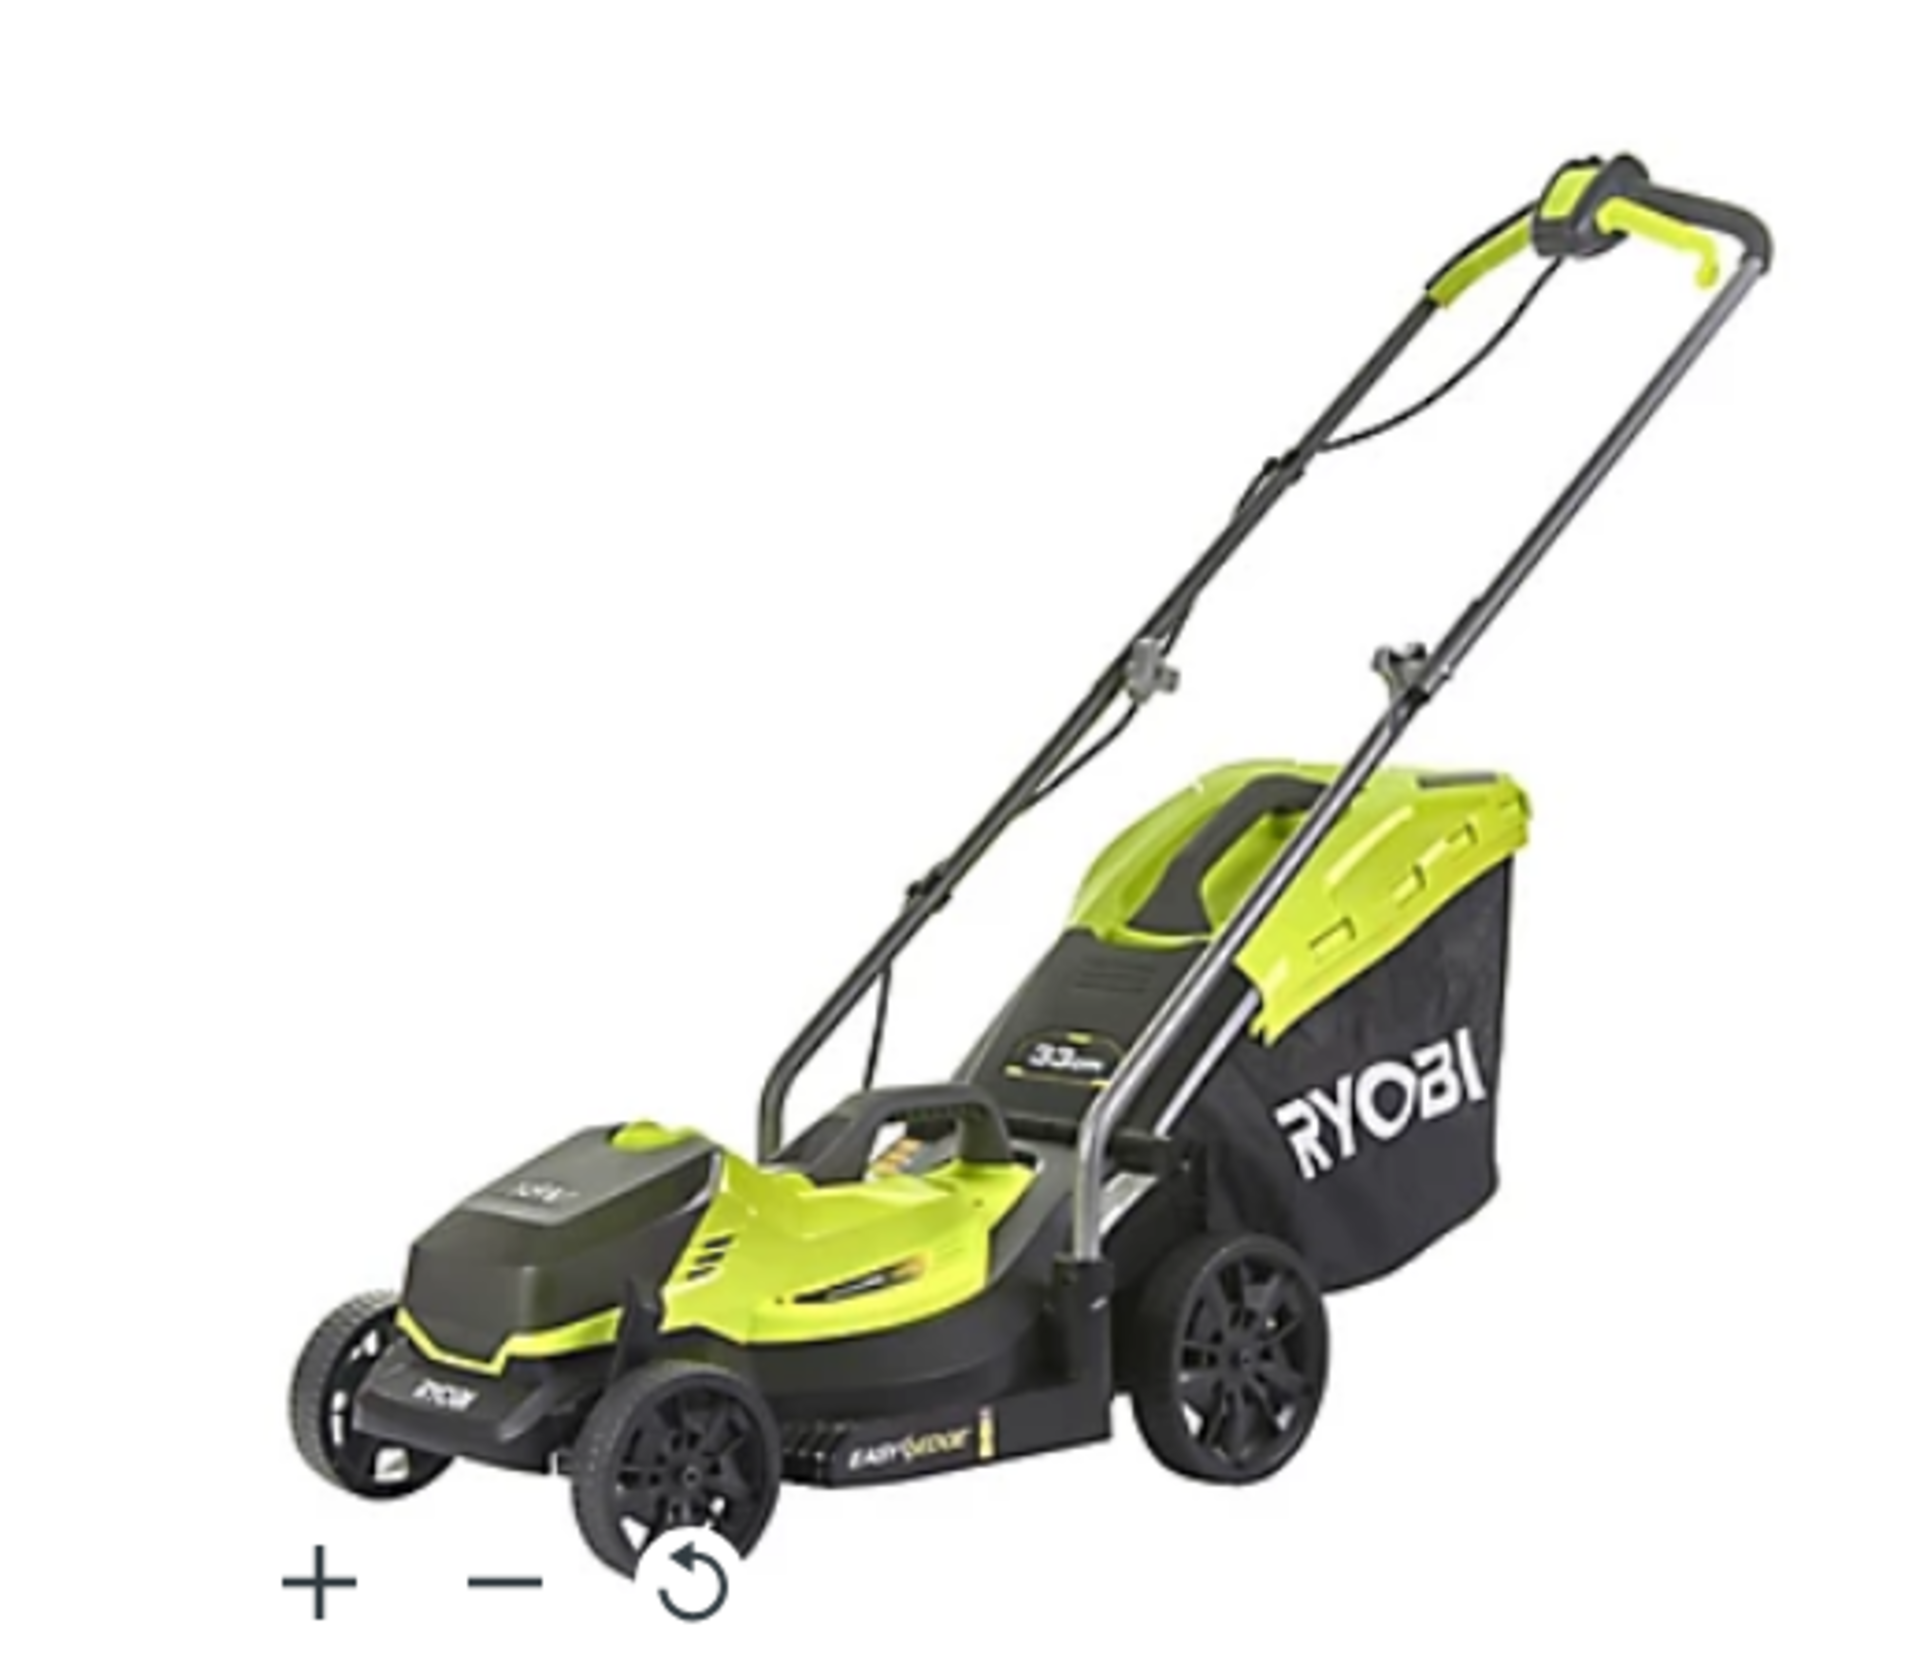 Ryobi ONE+ Cordless 18V Rotary Lawnmower (R45). Designed to be compact and lightweight, the 33cm